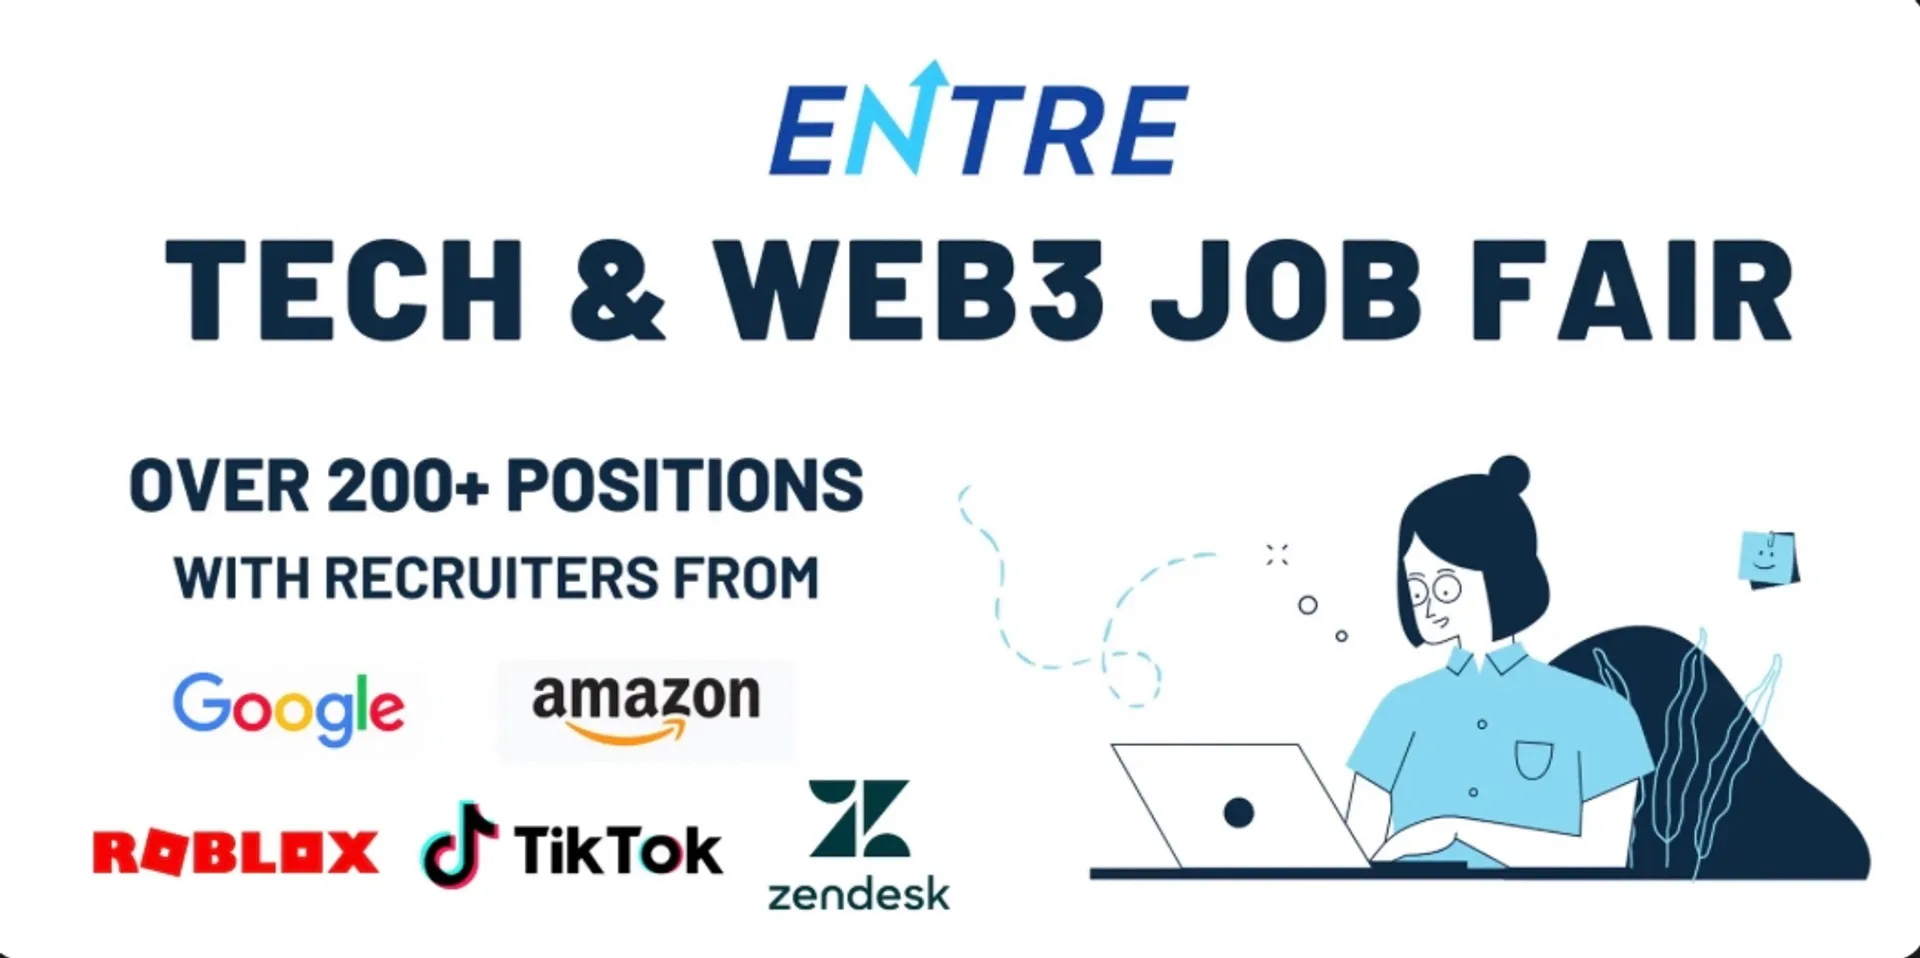 TONIGHT on Entre, will be hosting a Tech Career Fair featuring recruiters and hiring managers, you can register now and add to your calendar.  

Forward to your brothers, sisters, cousins, nephews, nieces, bf’s/gf’s, church family, Facebook groups, etc, spread the word!

RSVP HERE: https://joinentre.com/event/629134b6016a850009036ea6